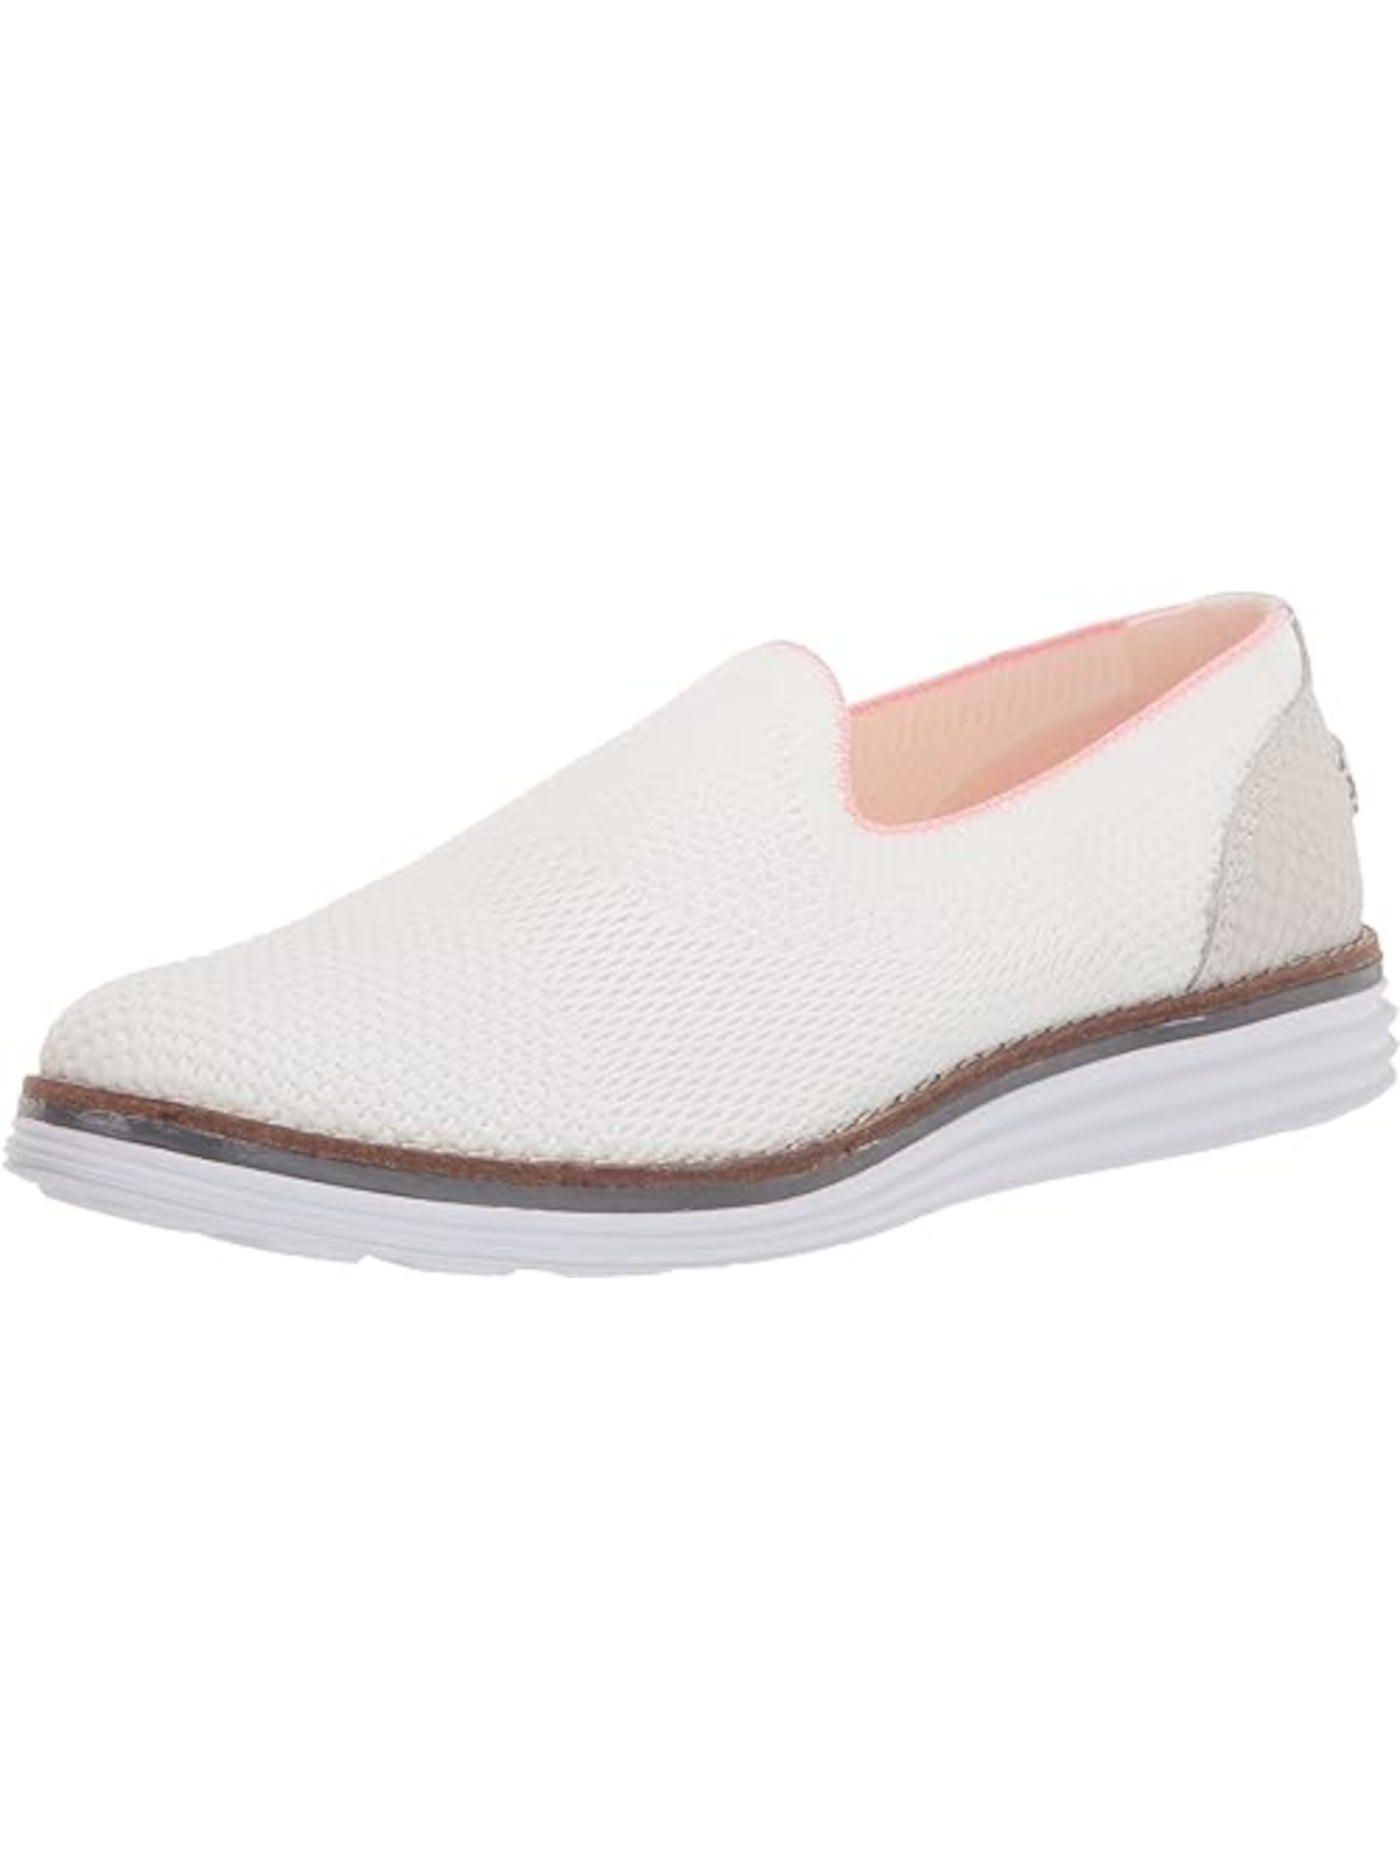 COLE HAAN Womens White Mixed Knit Traction Flexible Moisture Controll Comfort Cushioned Cloudfeel Meridan Almond Toe Wedge Slip On Loafers Shoes 7.5 B